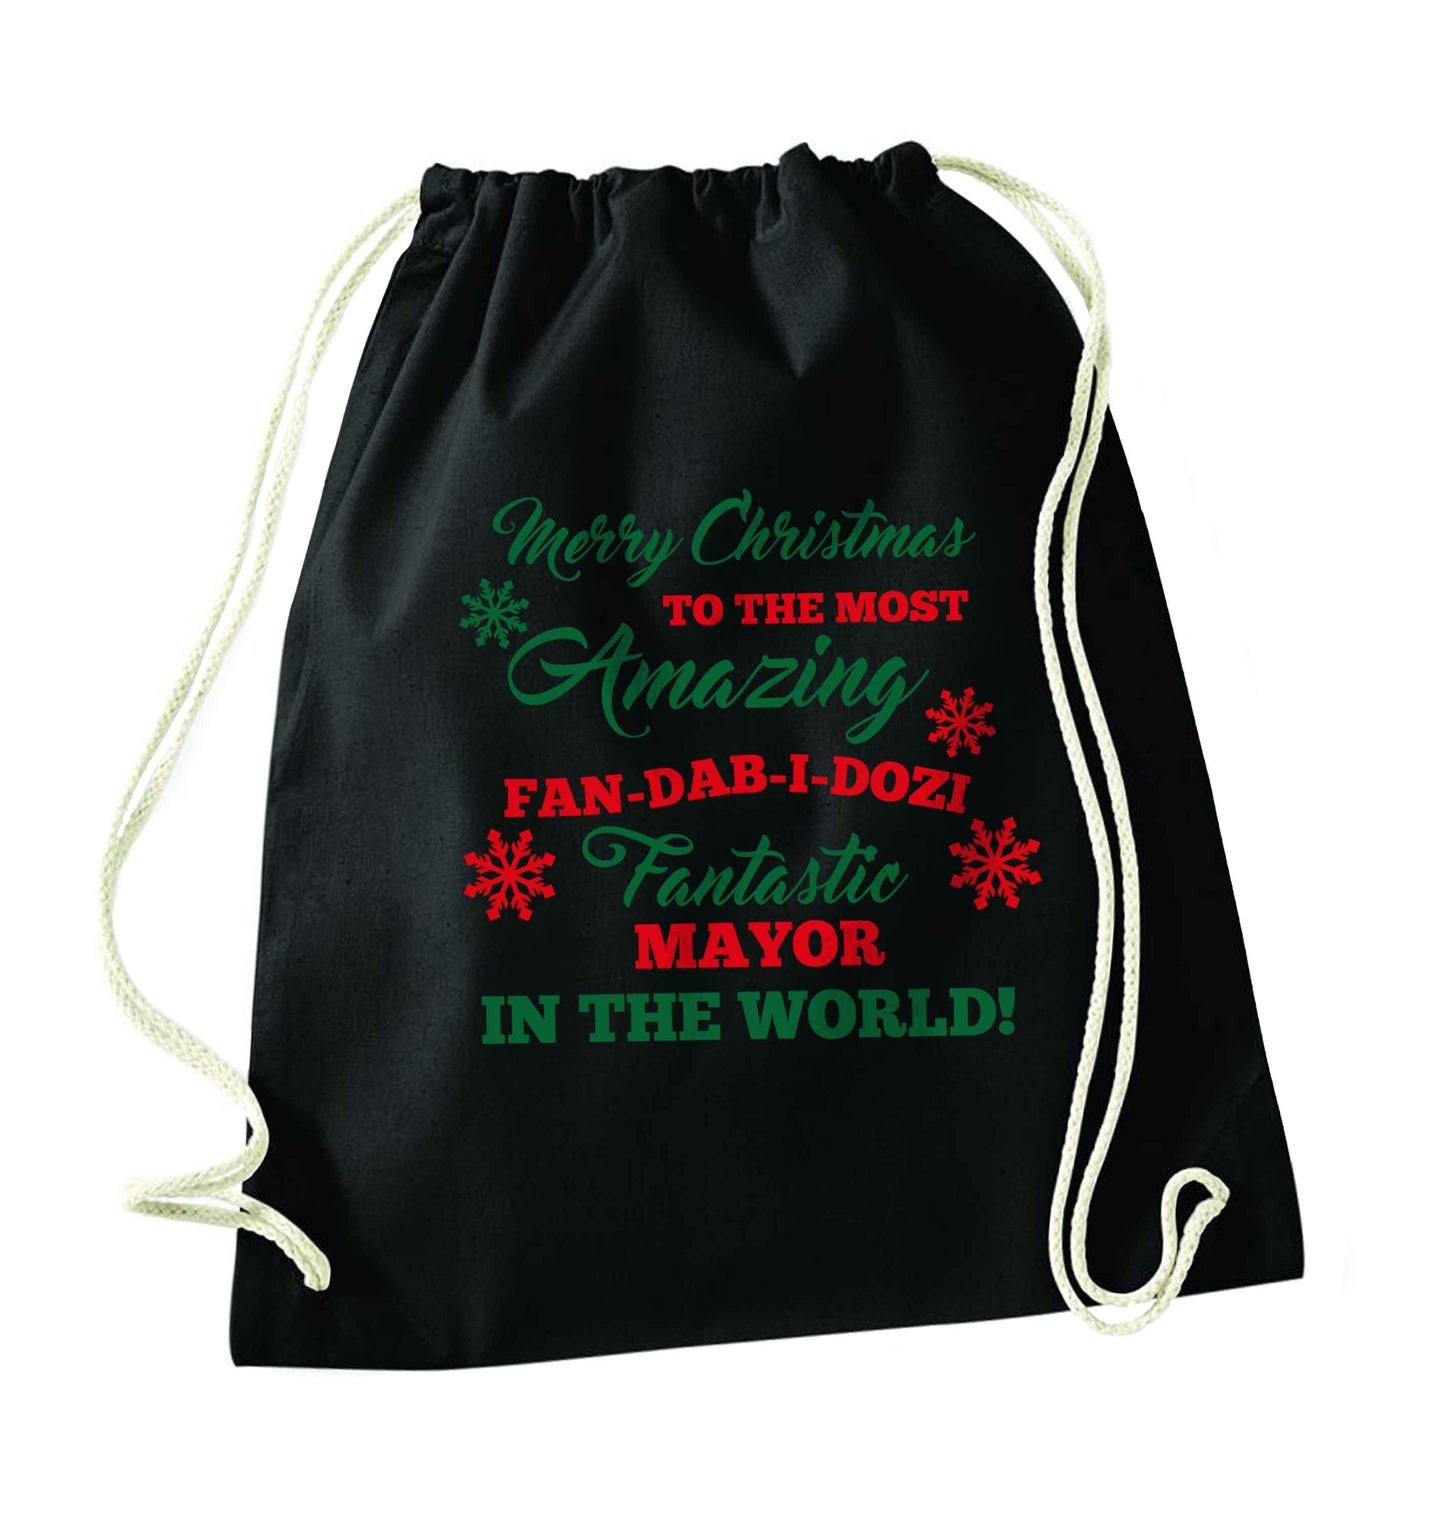 Merry Christmas to the most amazing fireman in the world! black drawstring bag